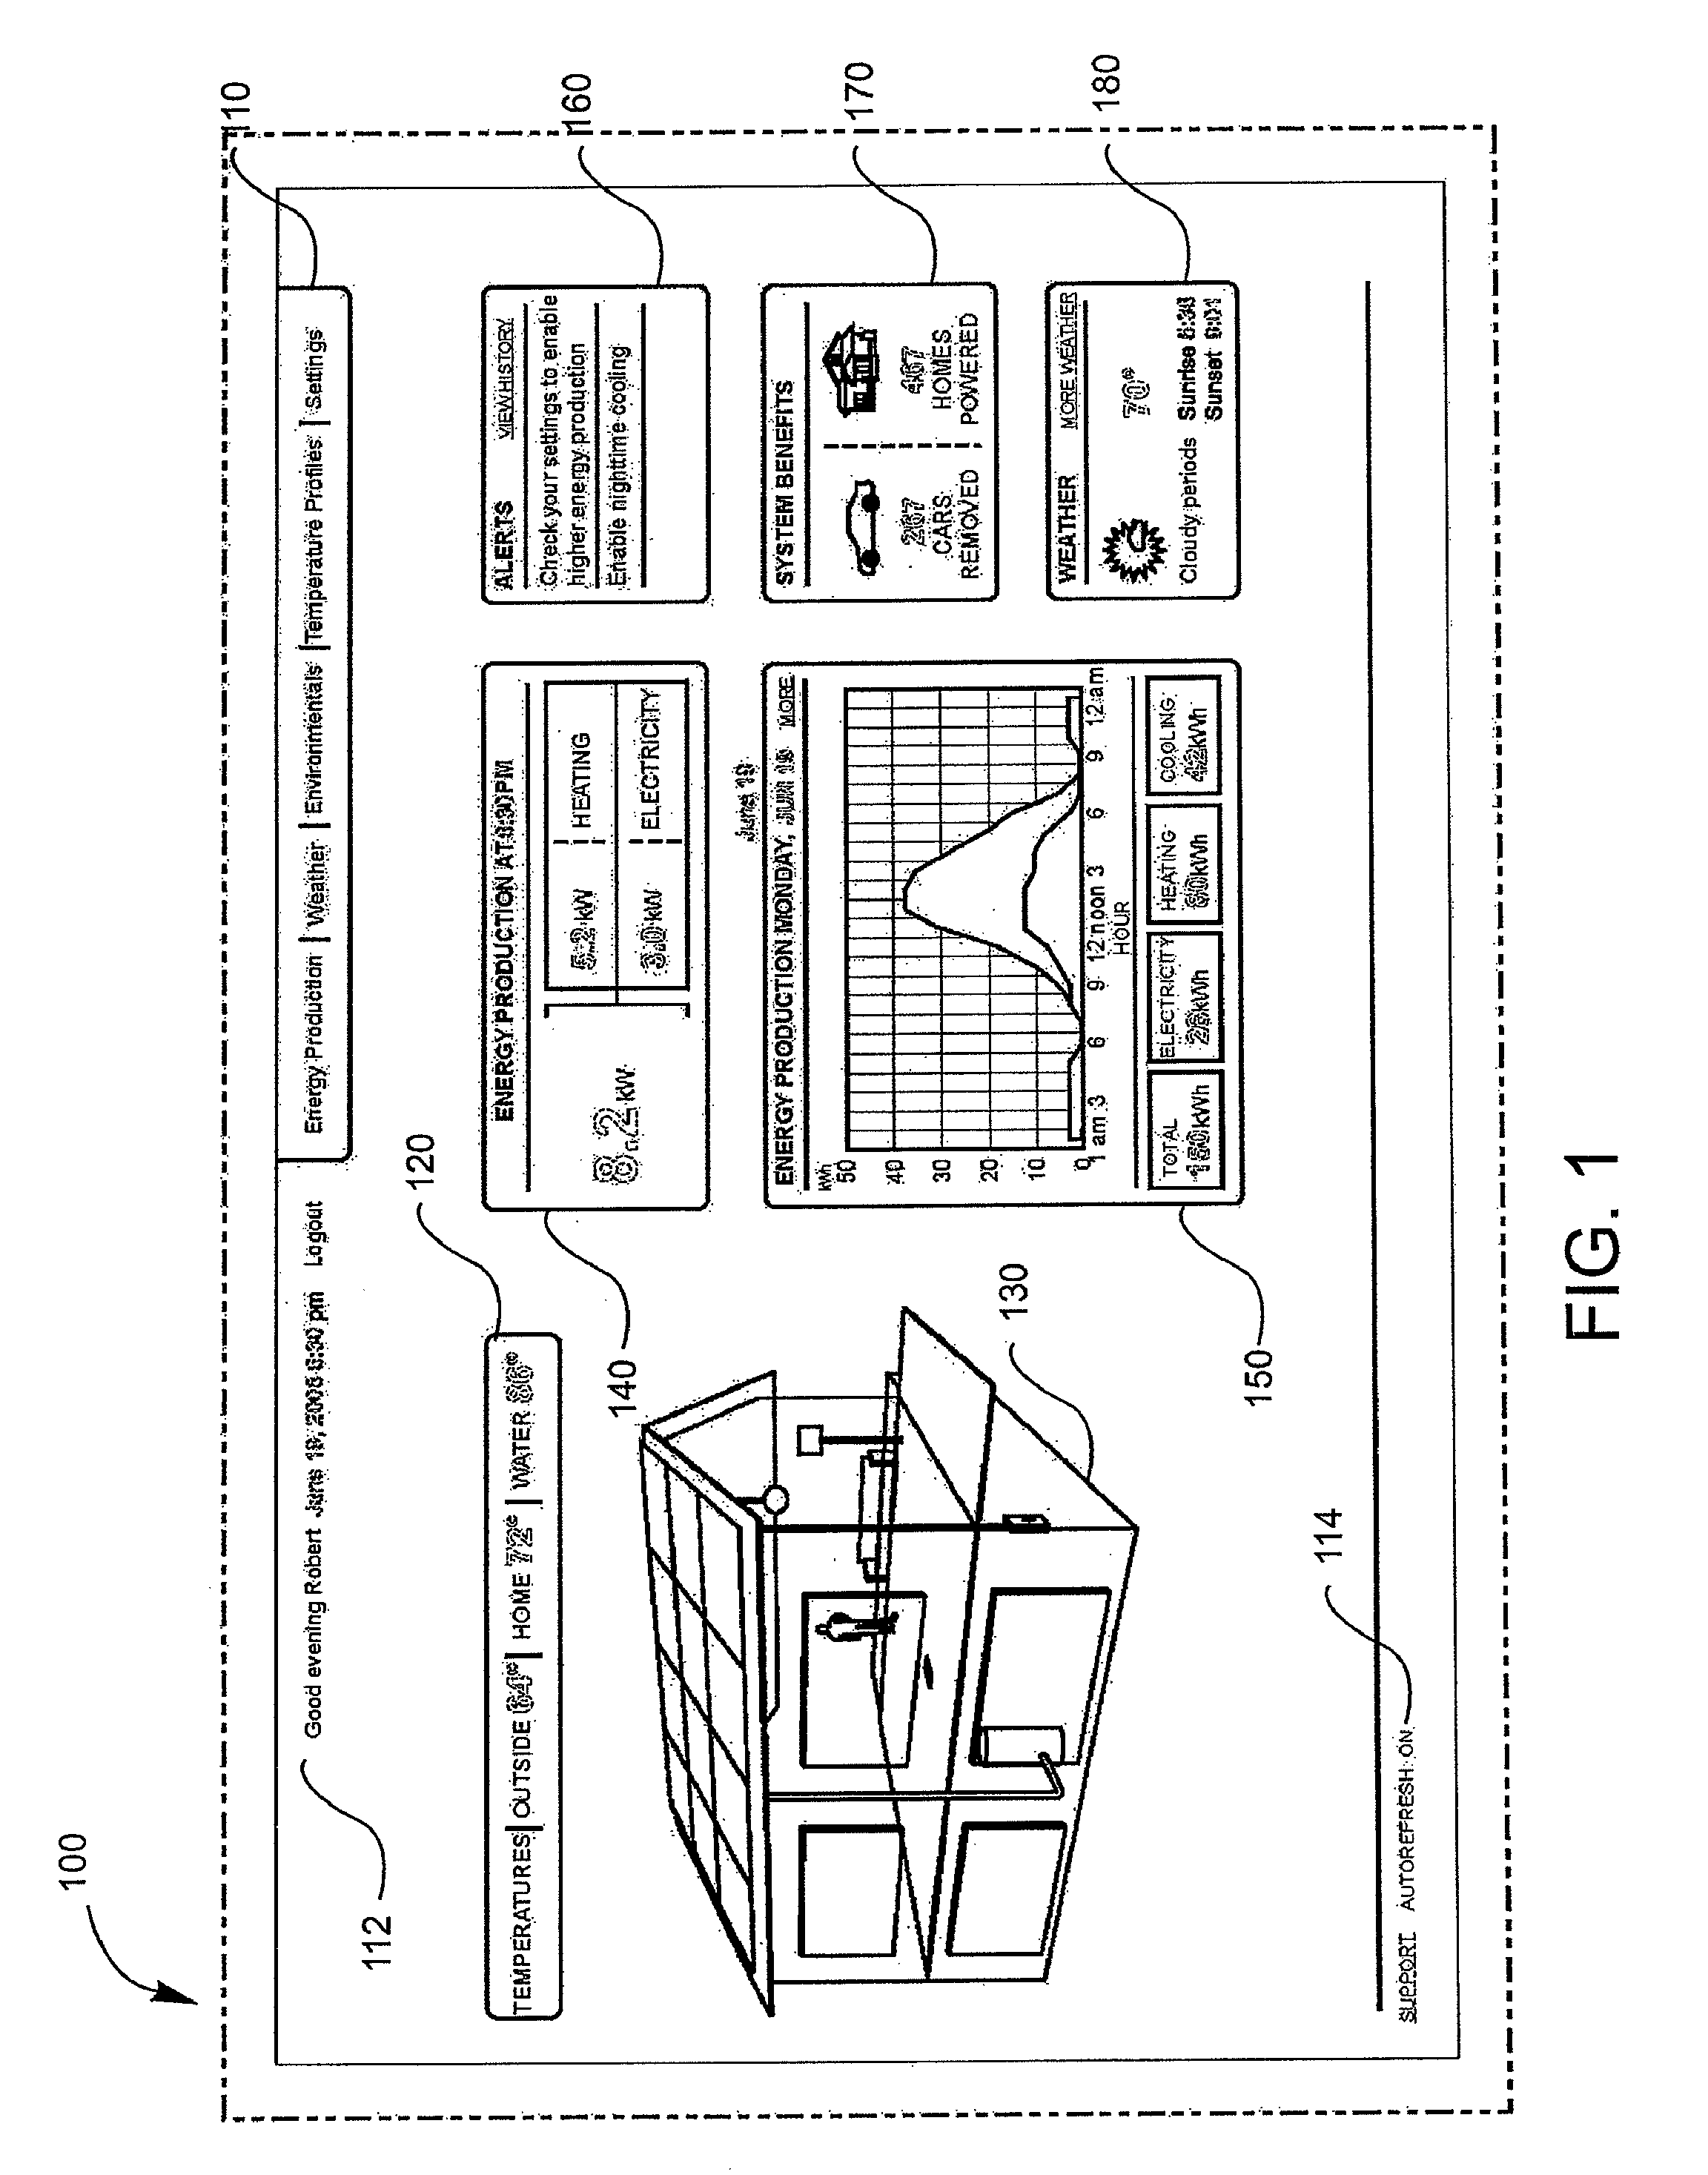 Healthy home graphical user interface method and device